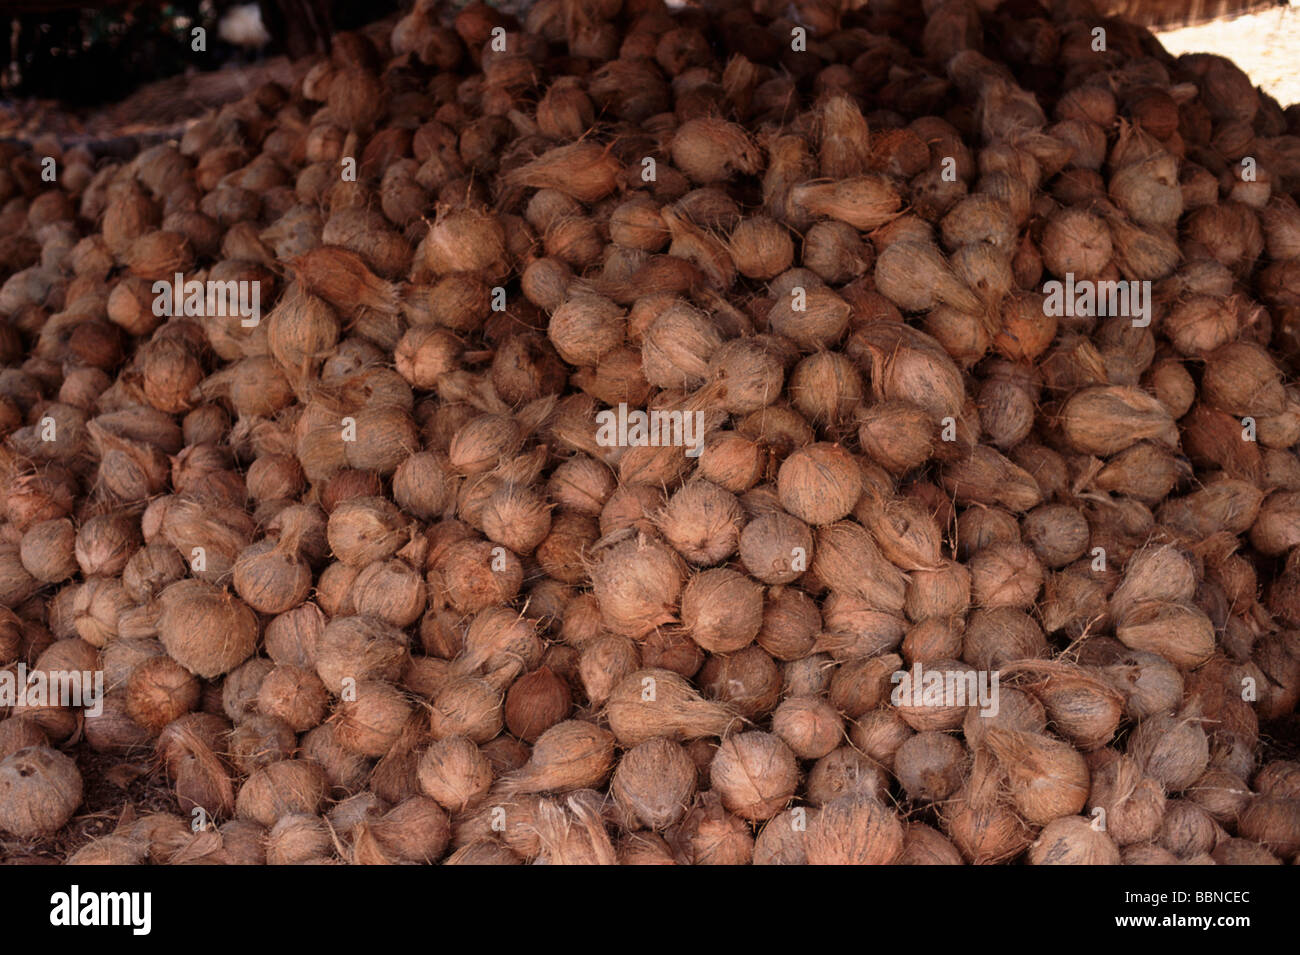 Coconuts for sale on market stall Stock Photo